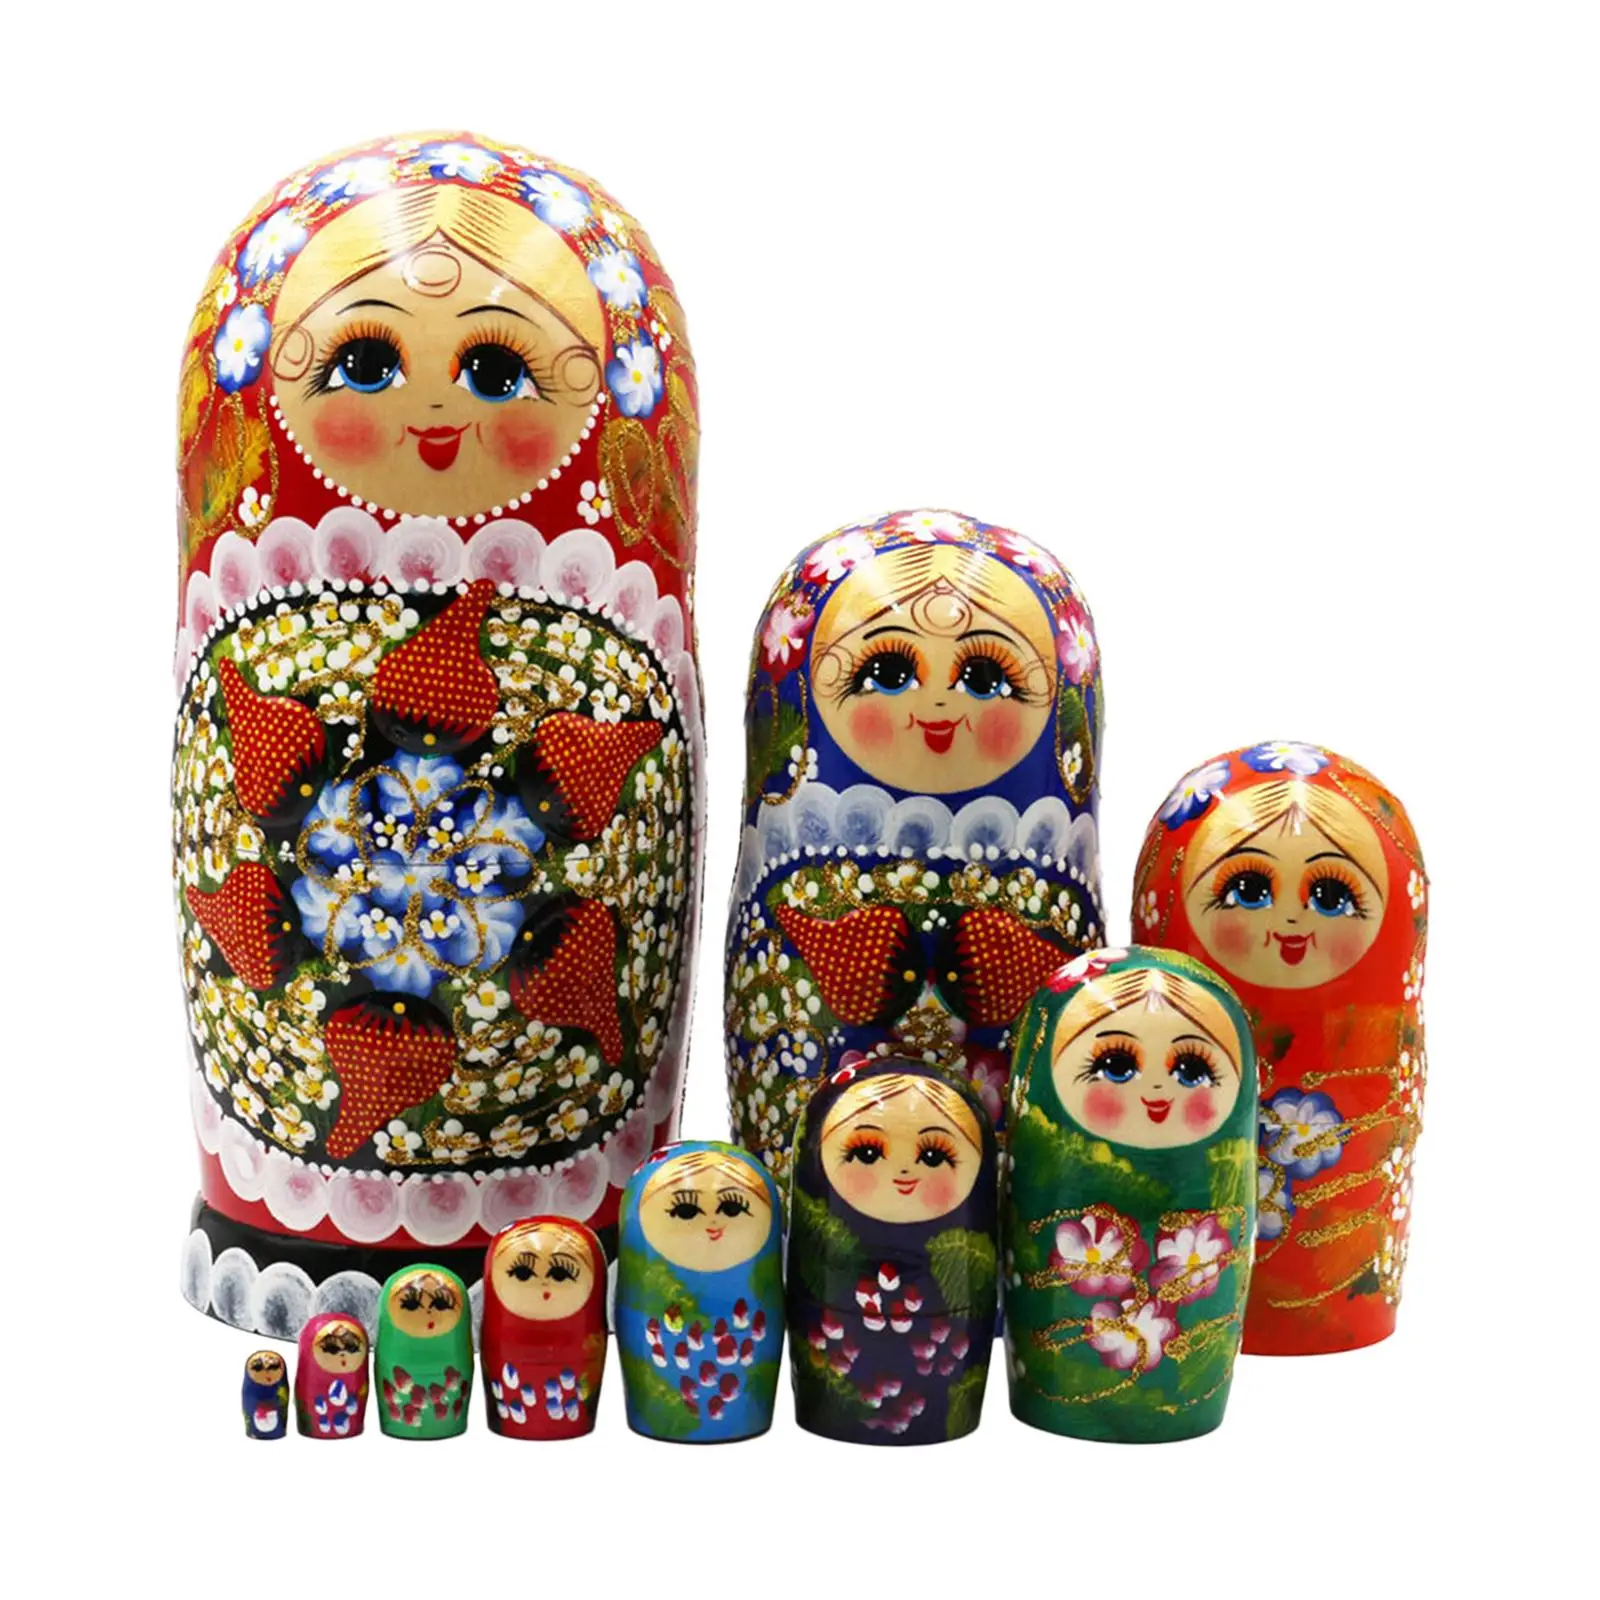 10Pcs Wooden Russian Nesting Doll Wooden Matryoshka Dolls Crafts Beautiful Cute Wishing Gift Stacking Doll Set for Home Decor